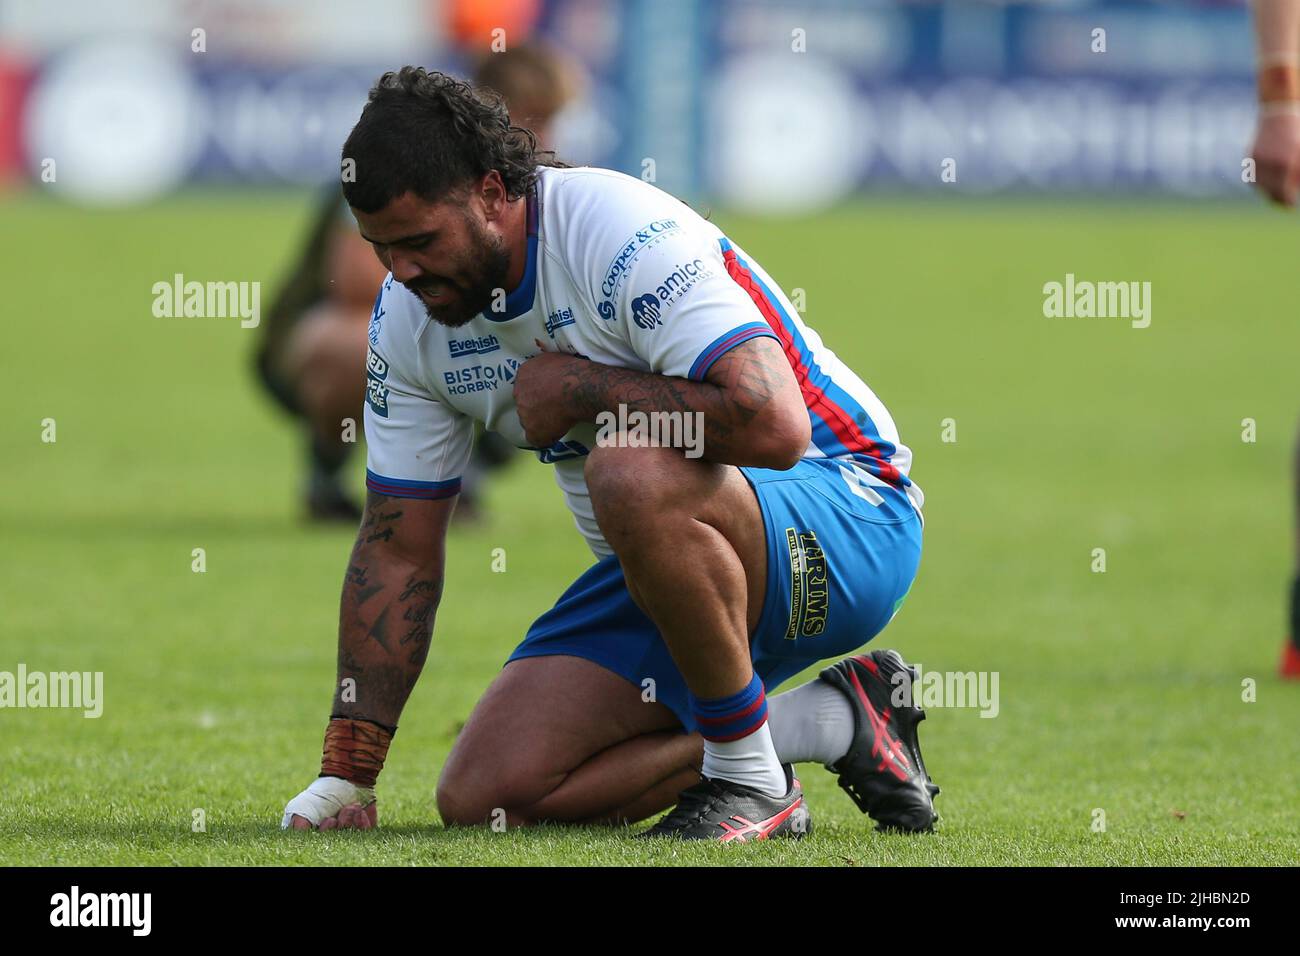 A dejected David Fifita #35 of Wakefield Trinity after the final whistle Stock Photo